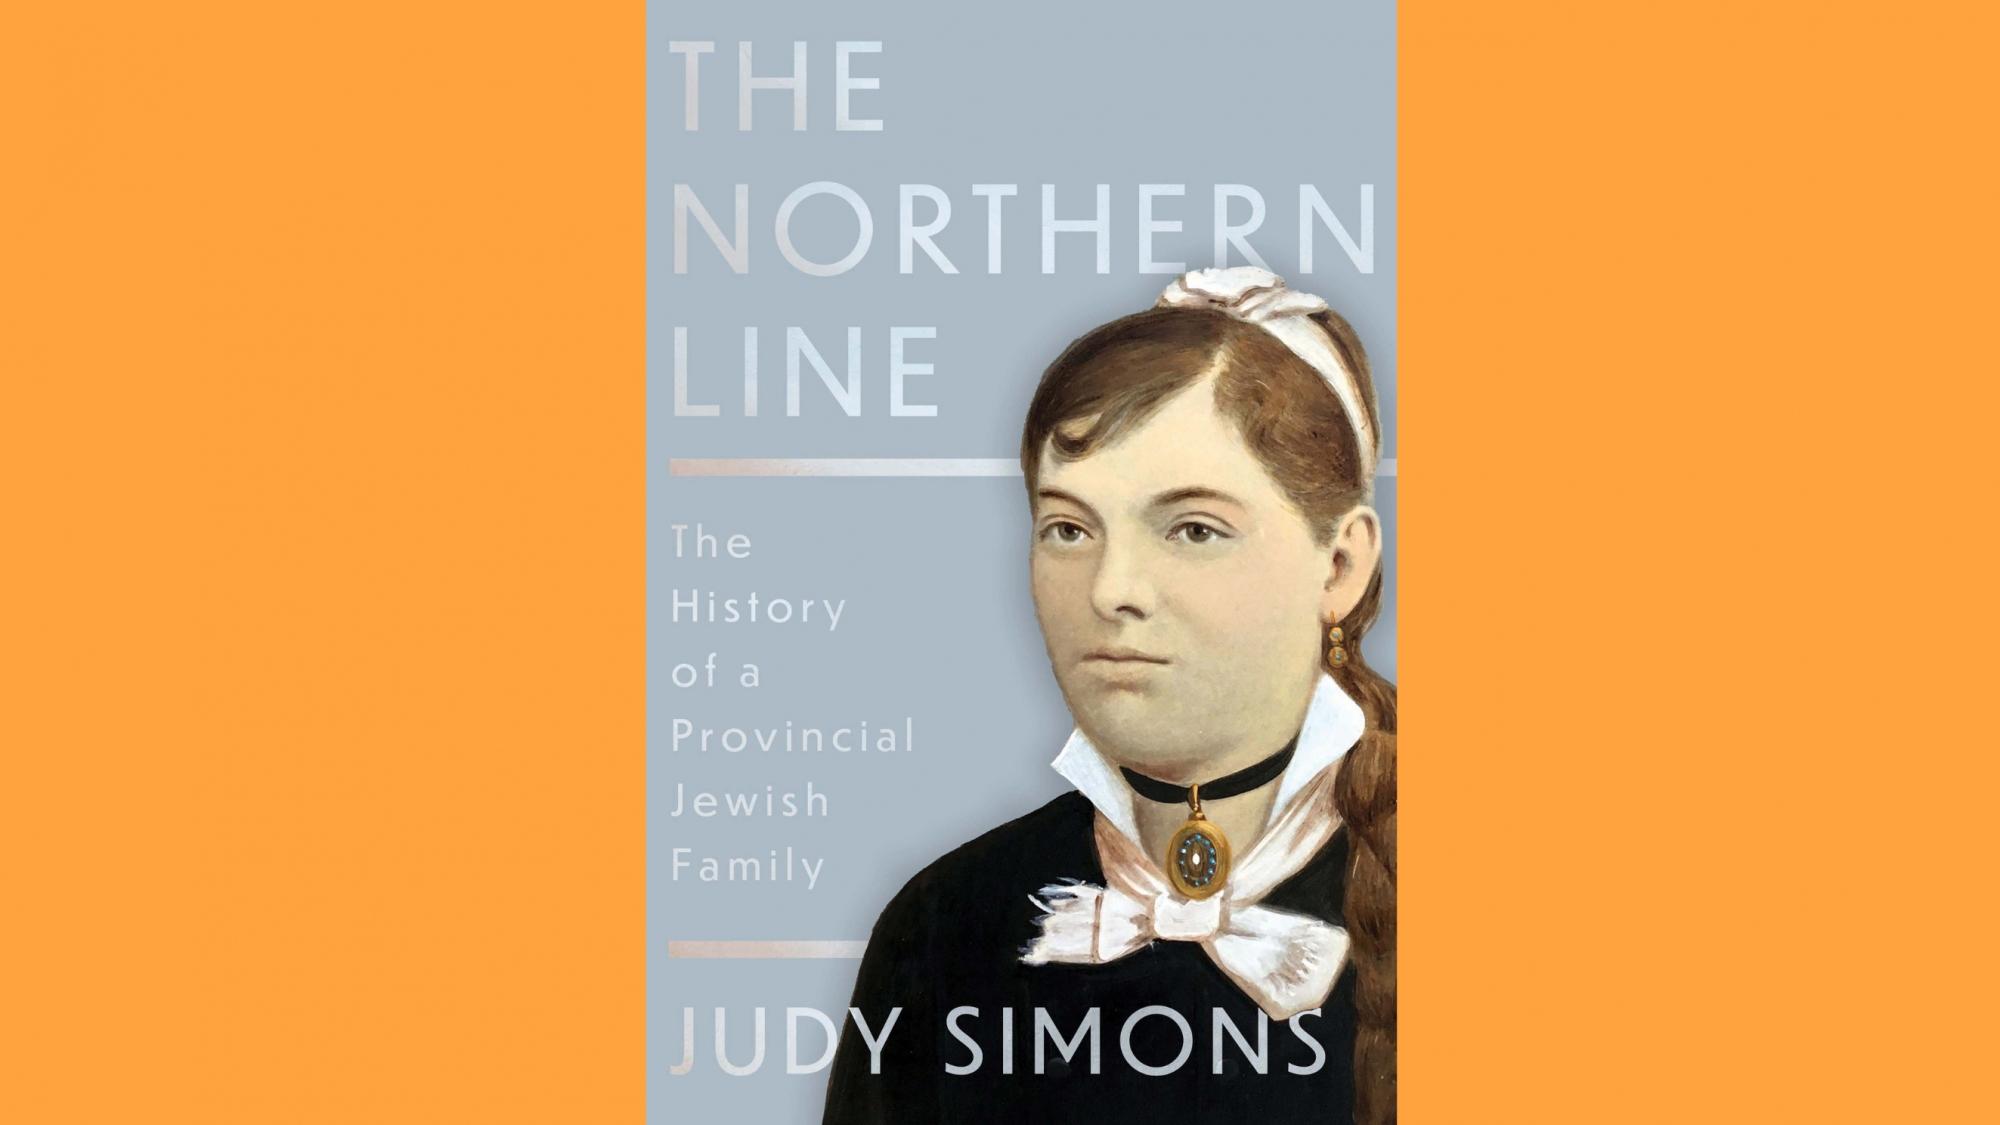 The Northern Line by Judy Simons (book cover)